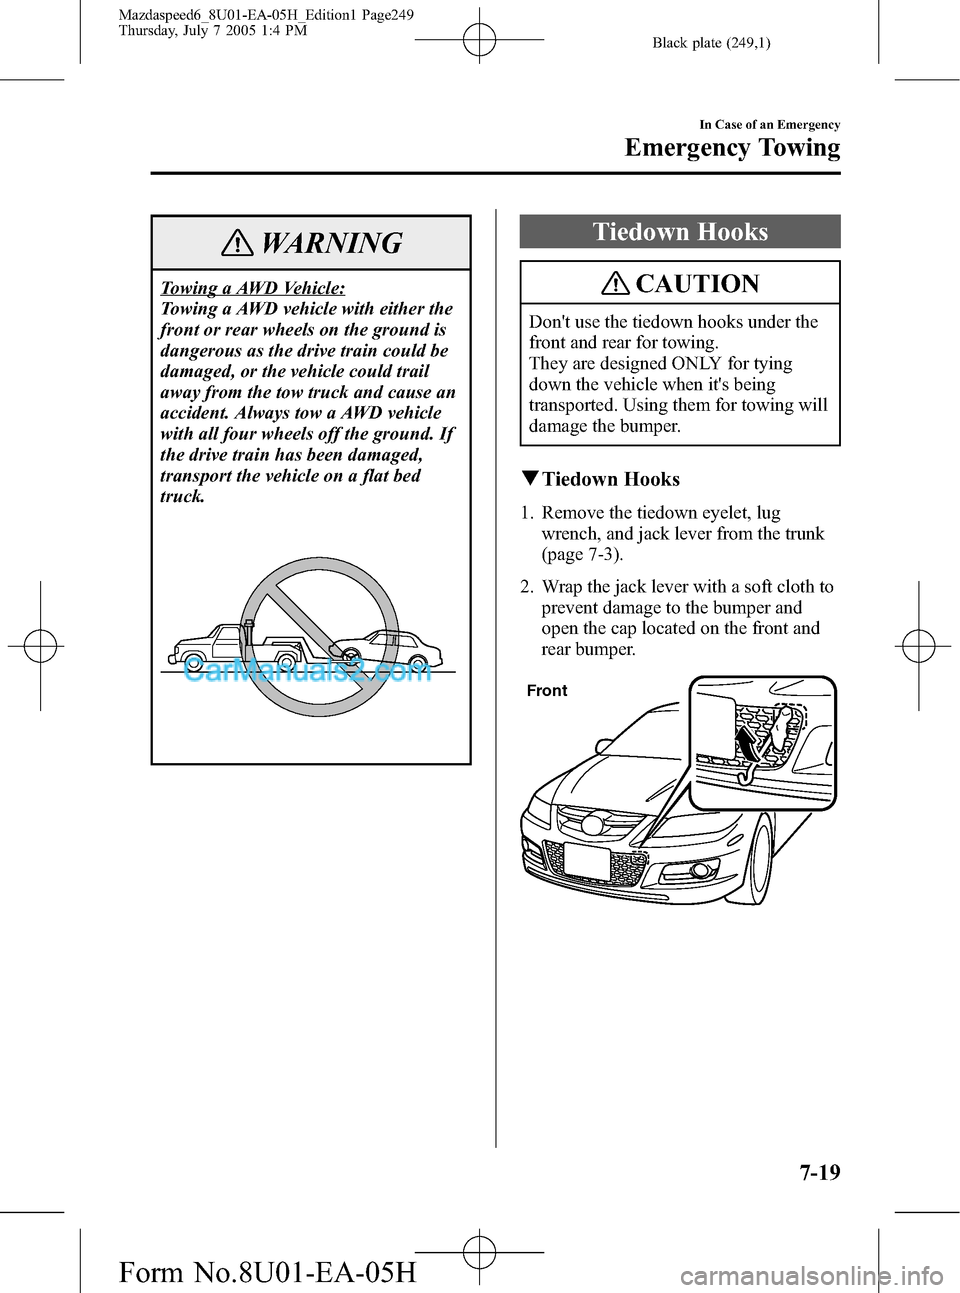 MAZDA MODEL MAZDASPEED 6 2006  Owners Manual (in English) Black plate (249,1)
WARNING
Towing a AWD Vehicle:
Towing a AWD vehicle with either the
front or rear wheels on the ground is
dangerous as the drive train could be
damaged, or the vehicle could trail
a